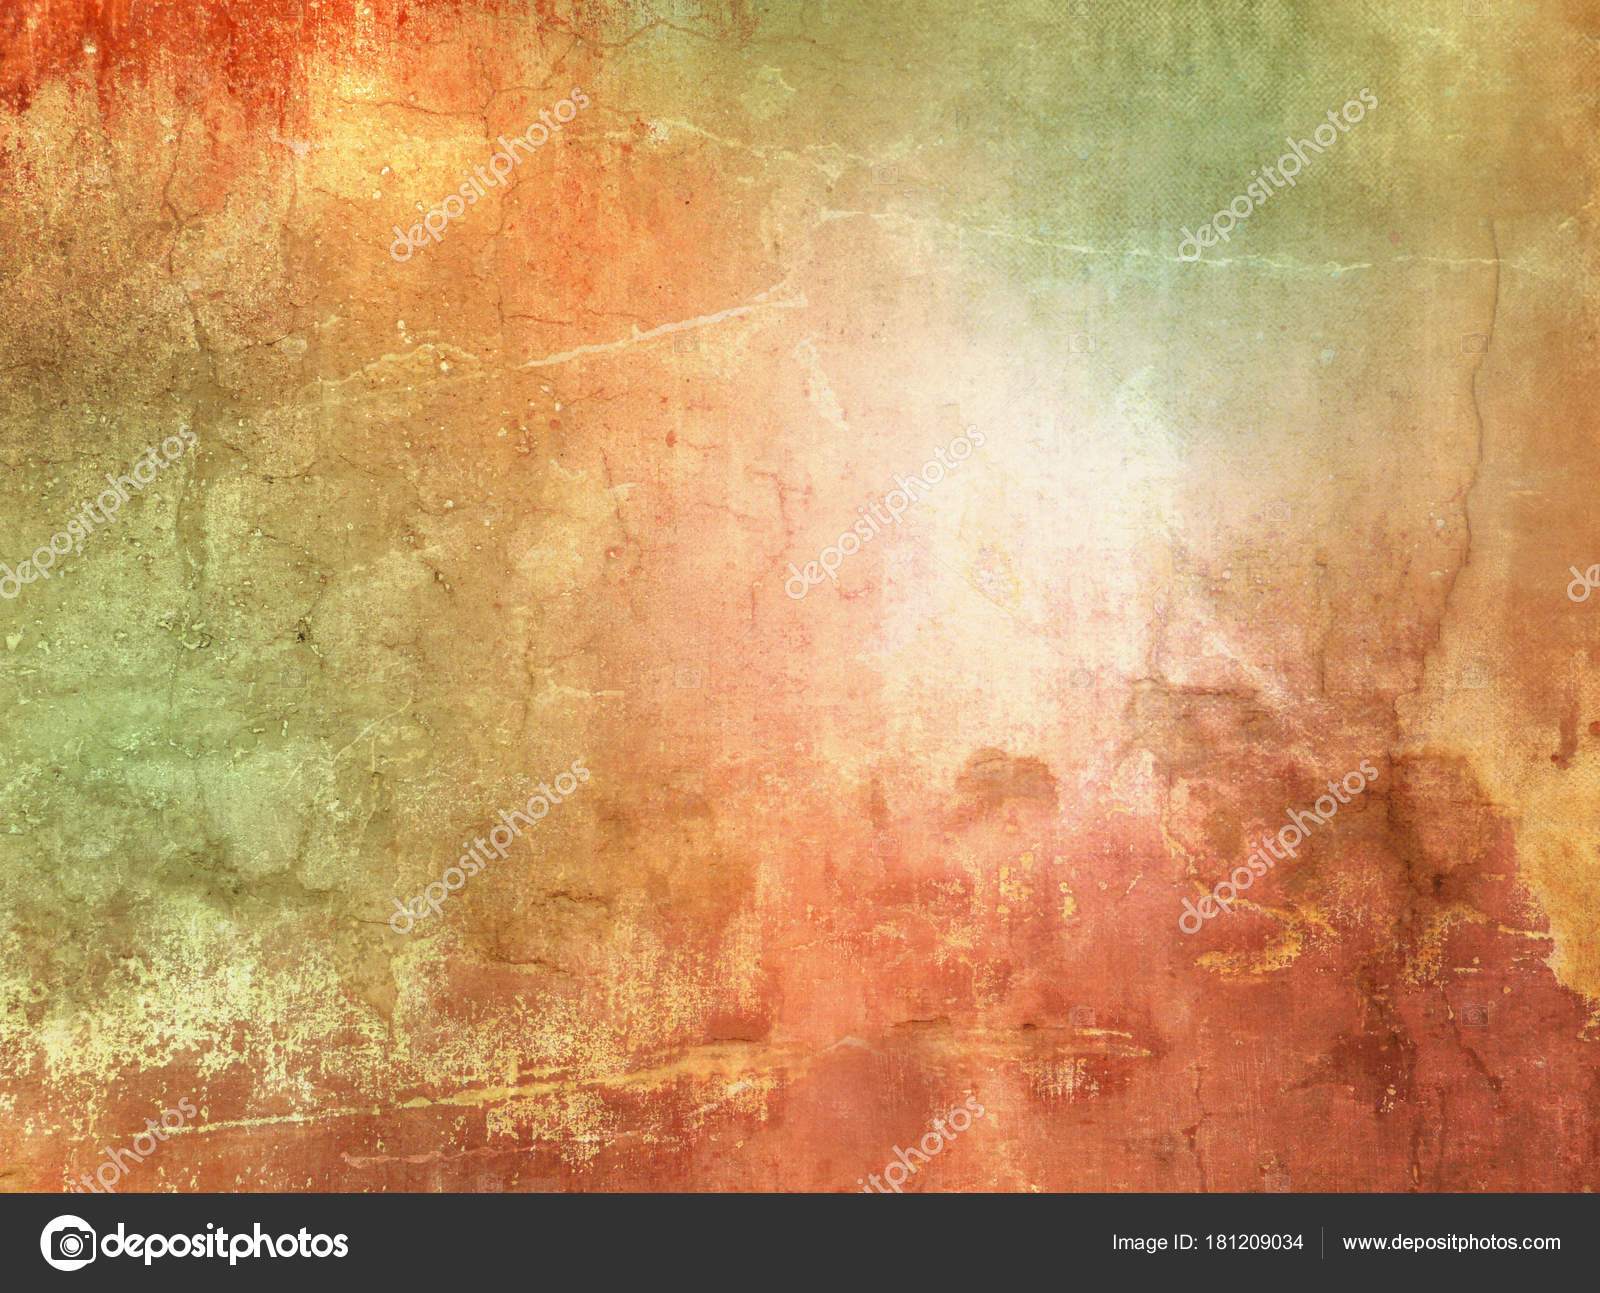 Colorful grunge background orange green - abstract nature texture ...